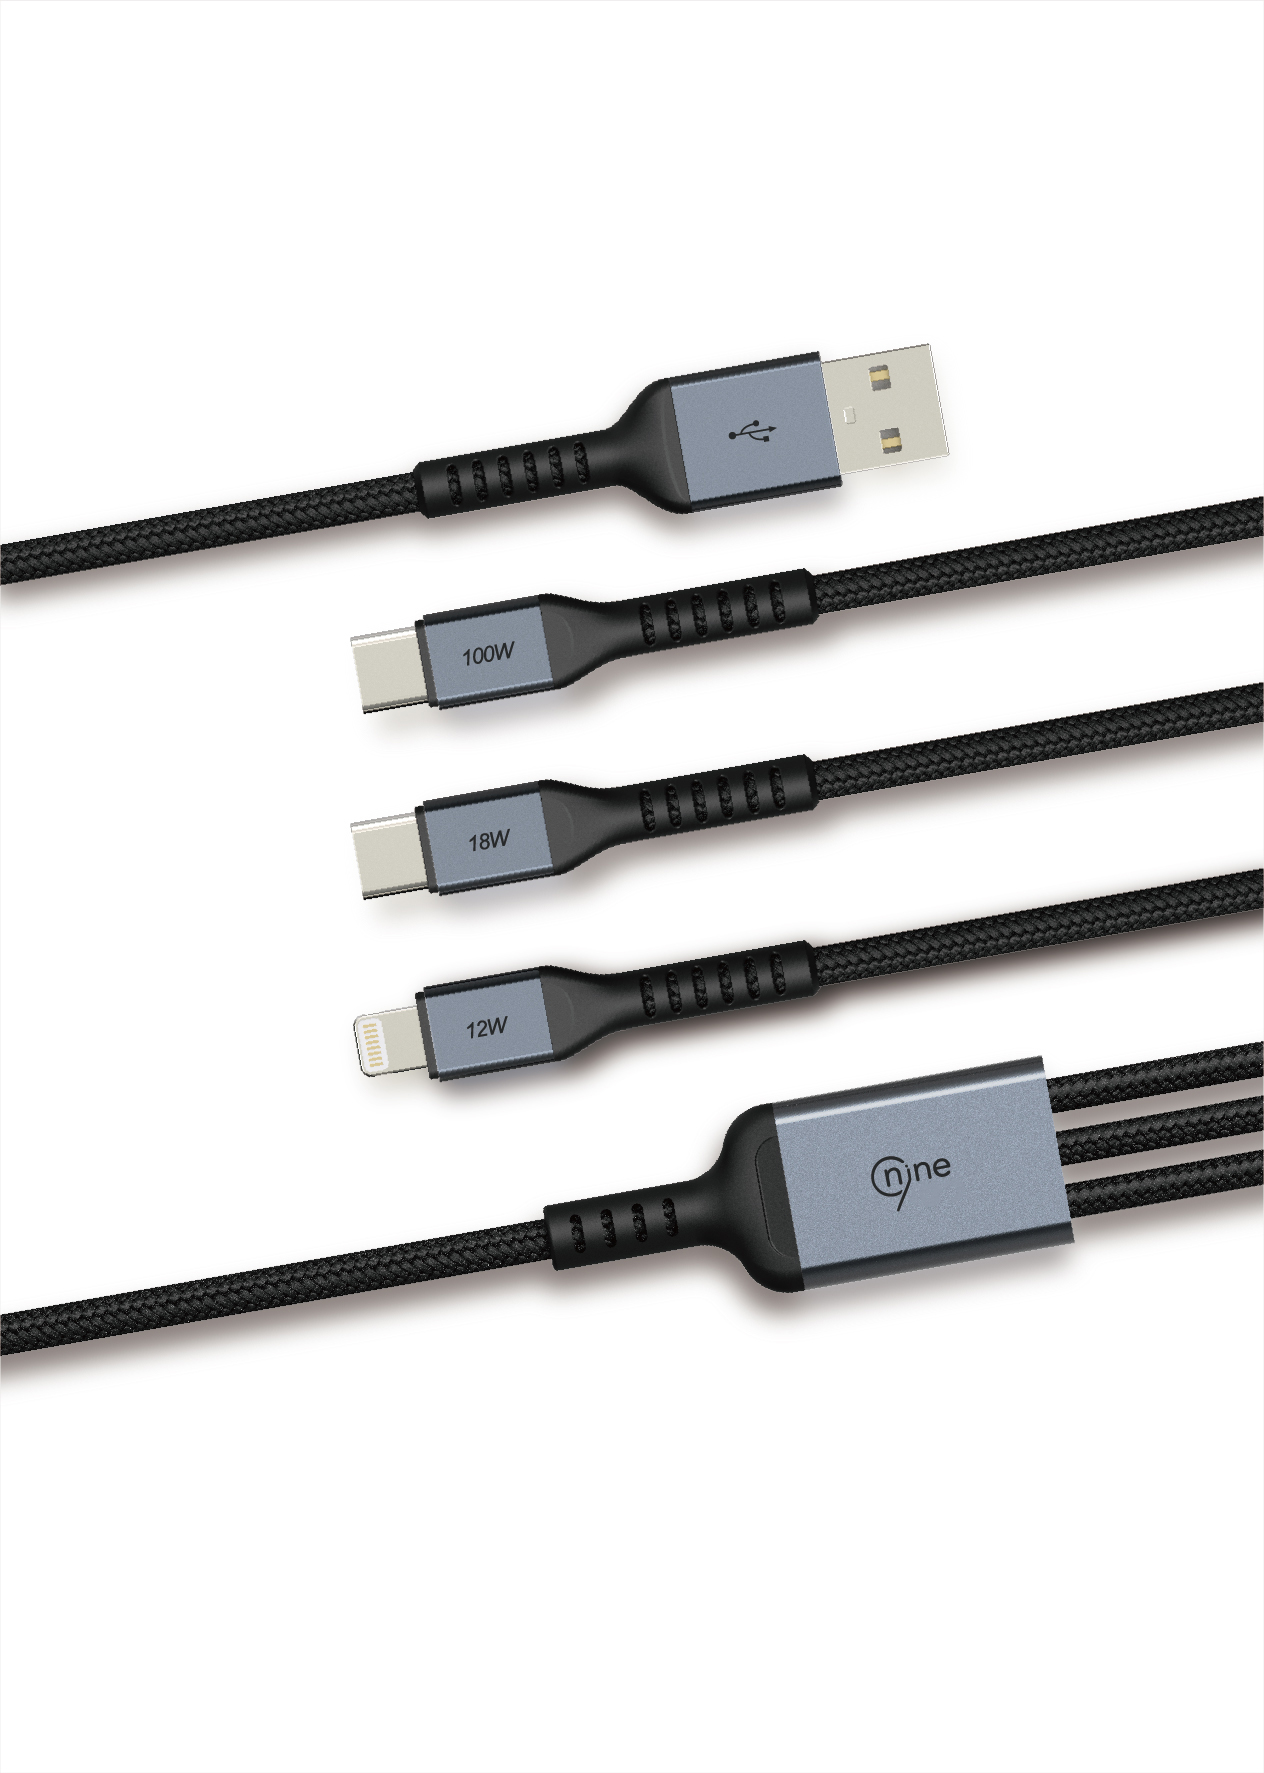 NINE DATA CABLE POWERLINE AL HOT SELLING HIGH QUALITY